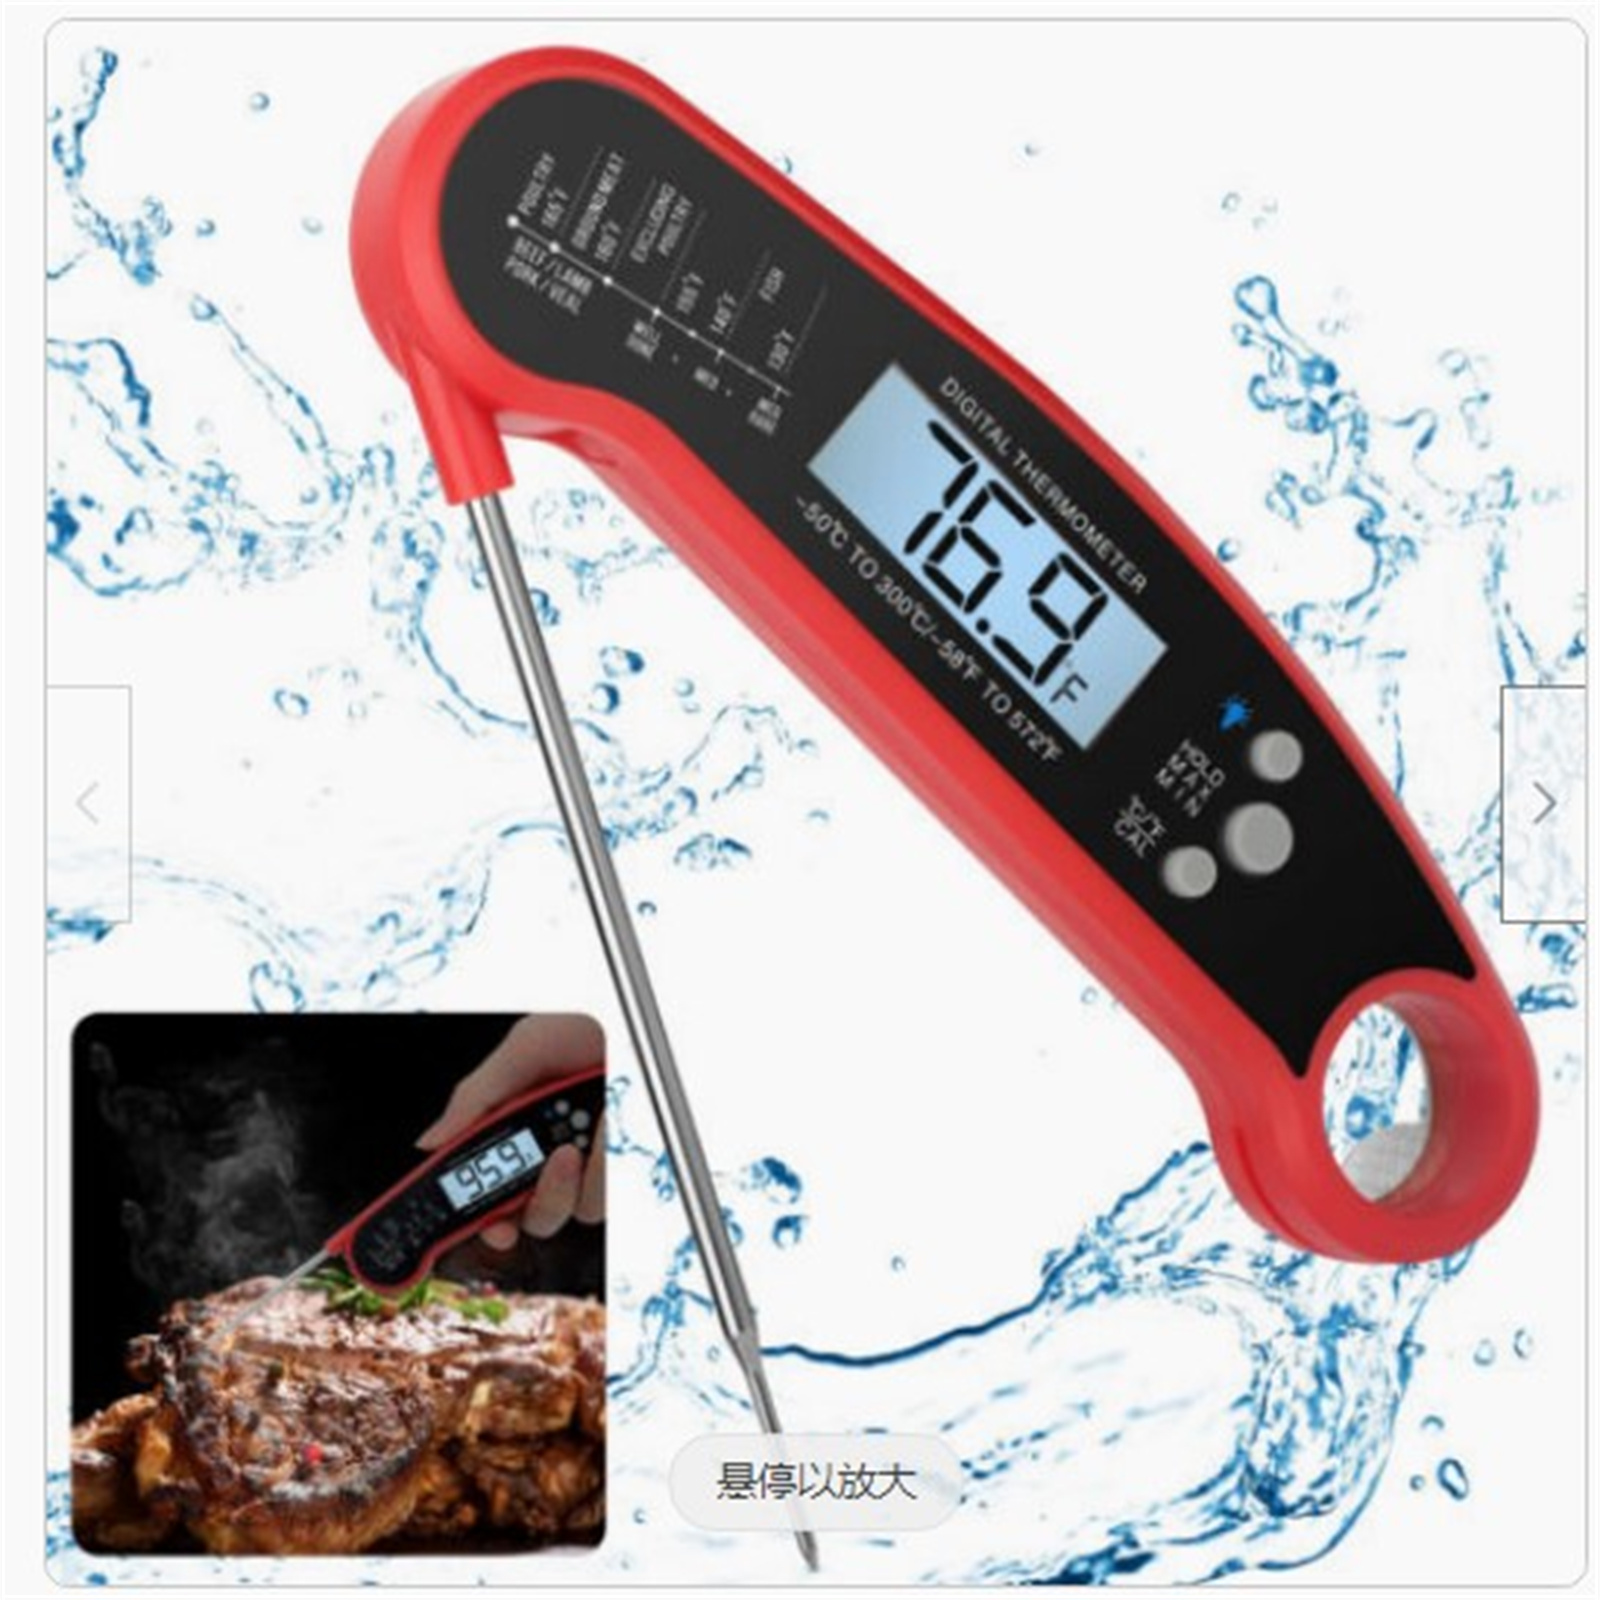 Folding Food Thermometer Lcd Backlight Display Accurate Temperature Measurement Kitchen Supply For Cooking red